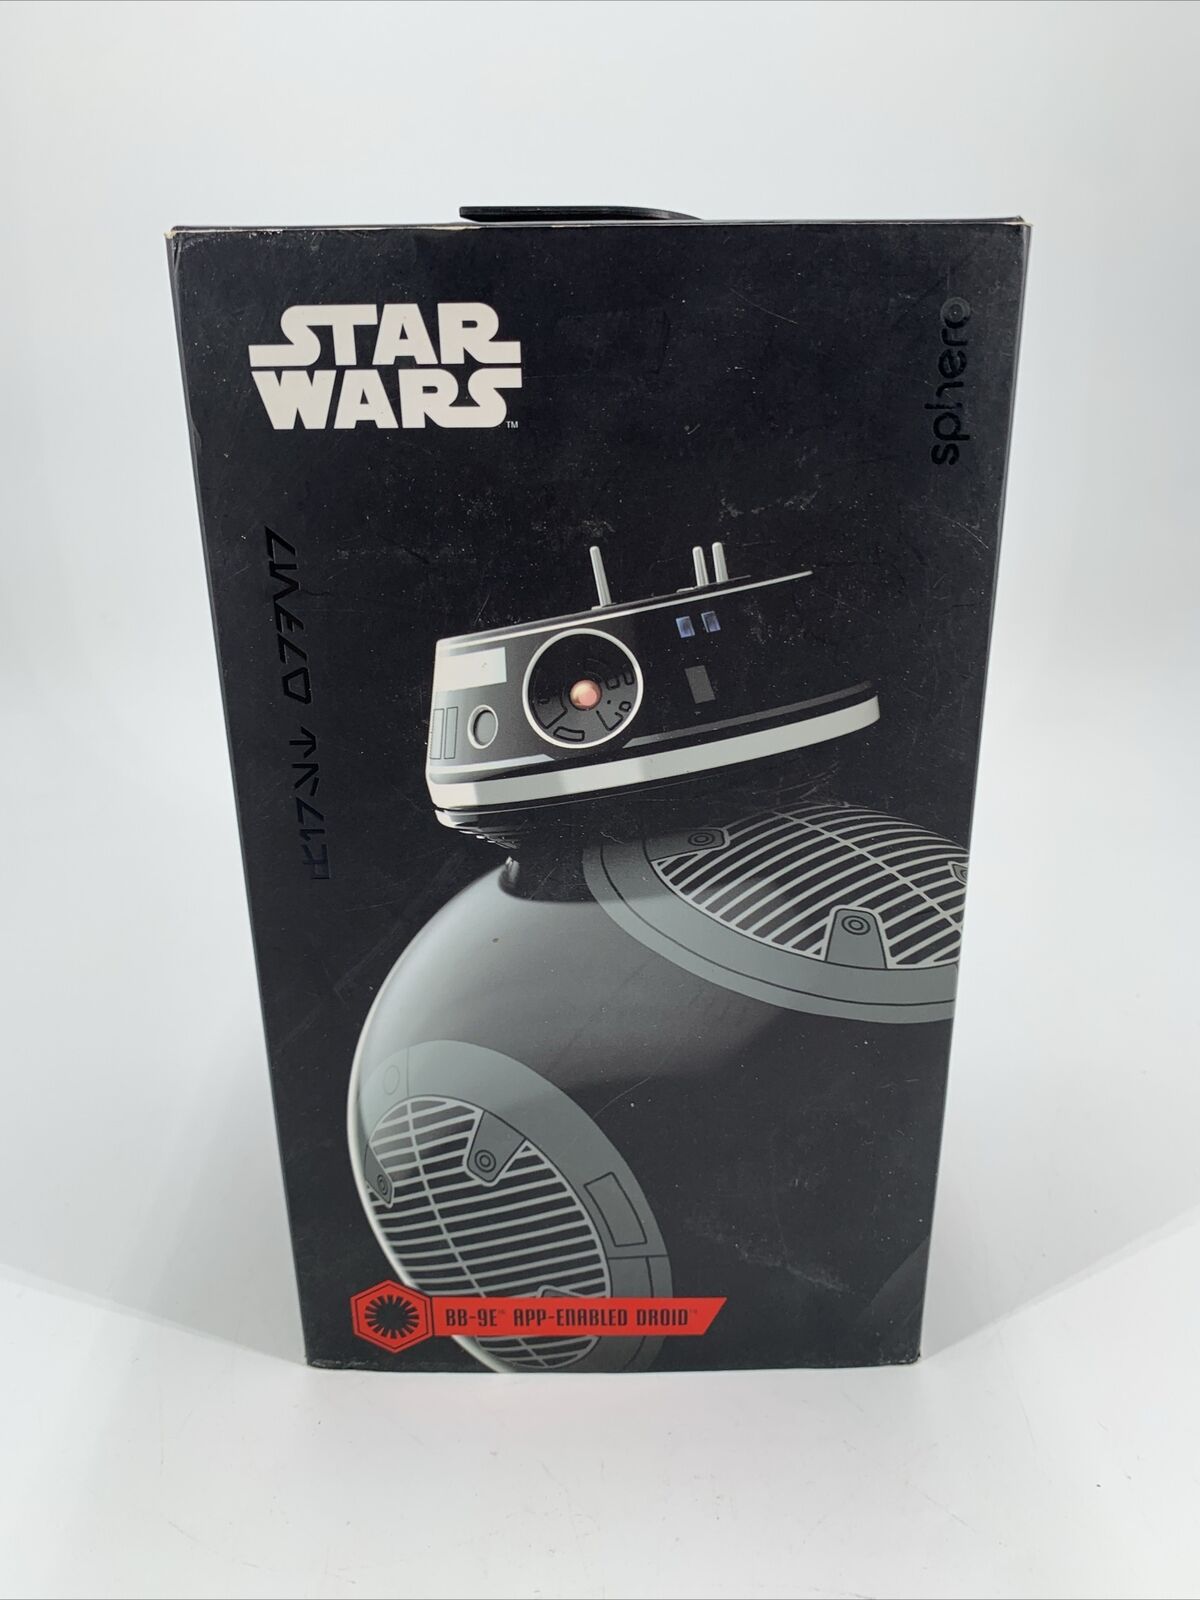 Sphero Star Wars BB-9E App-Enabled Droid CIB in Box all in great conditoin